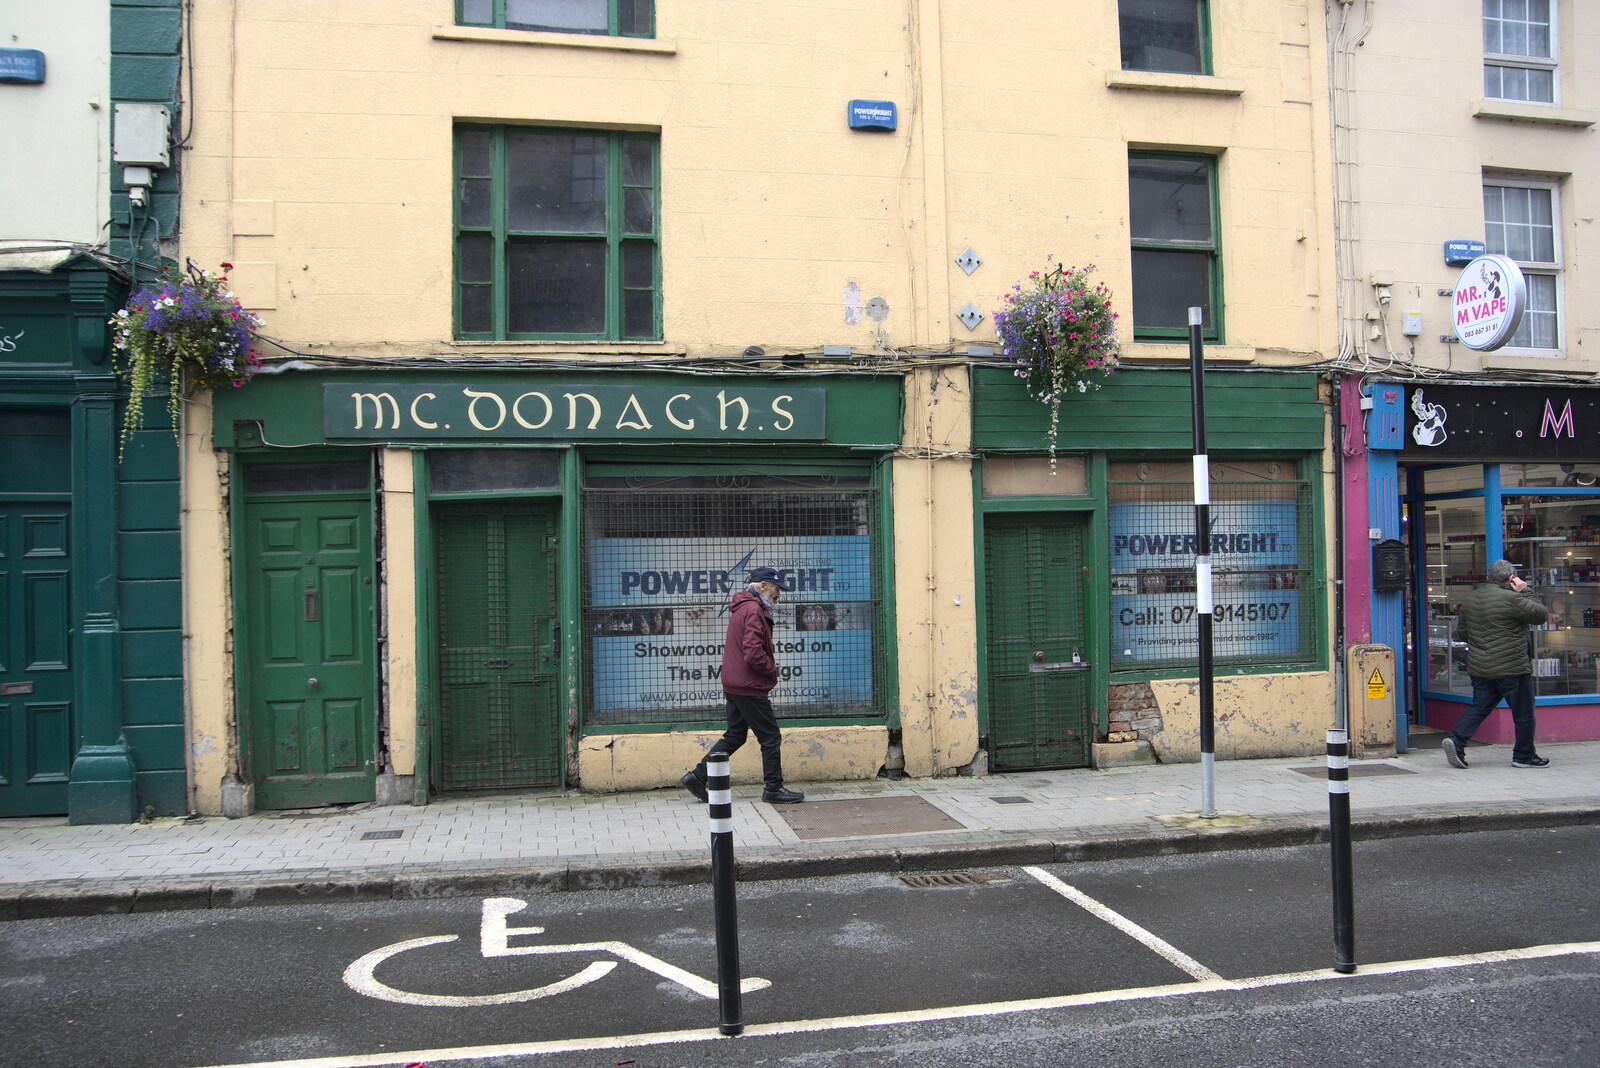 A Trip to Manorhamilton, County Leitrim, Ireland - 11th August 2021: The derelict Mc Donagh's